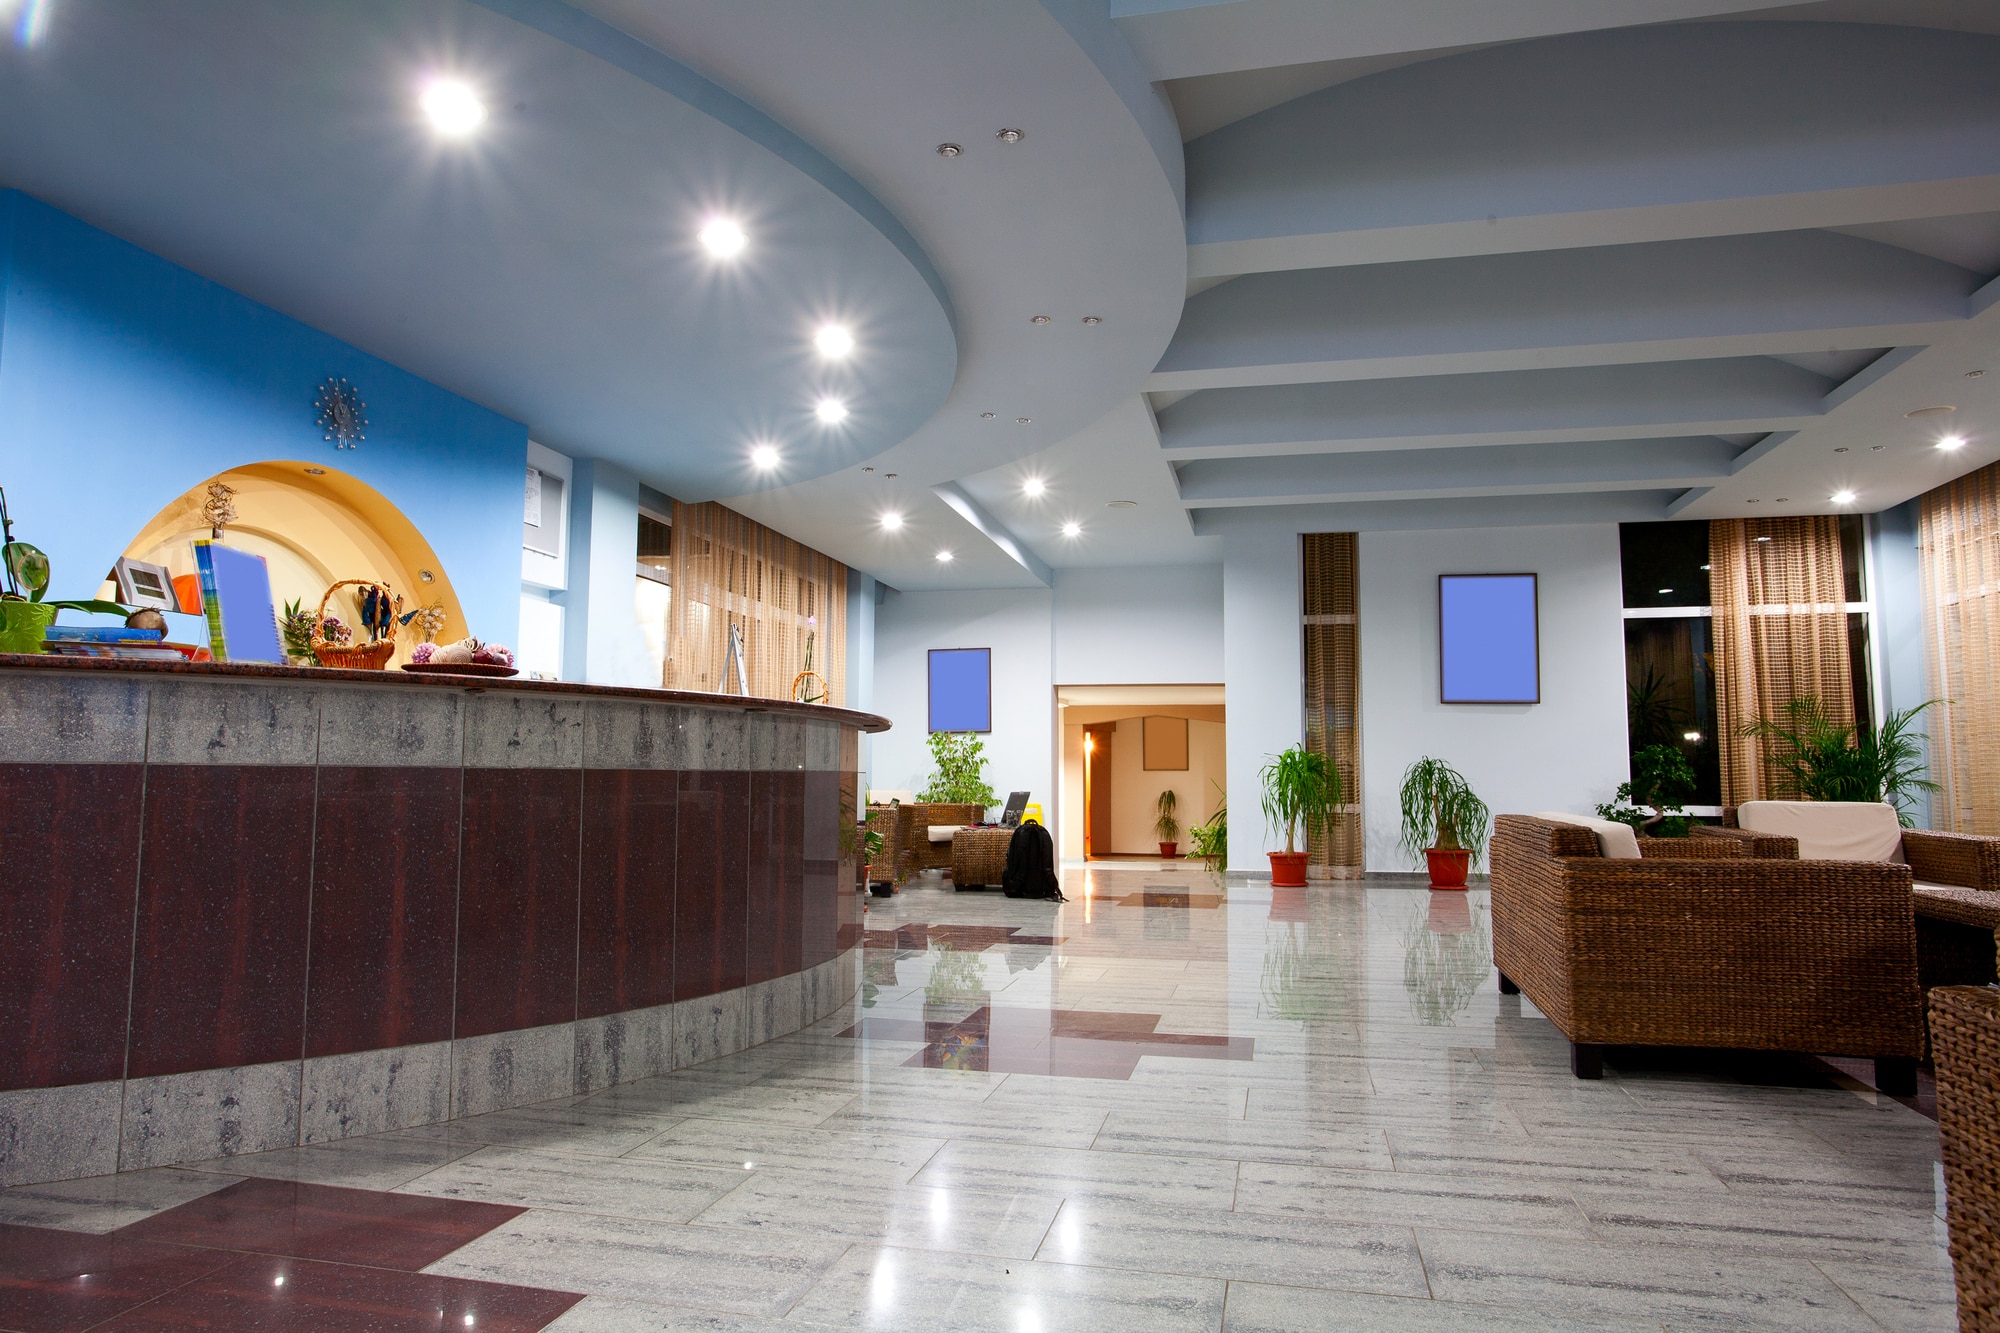 Indoor image of a hotel lobby or reception